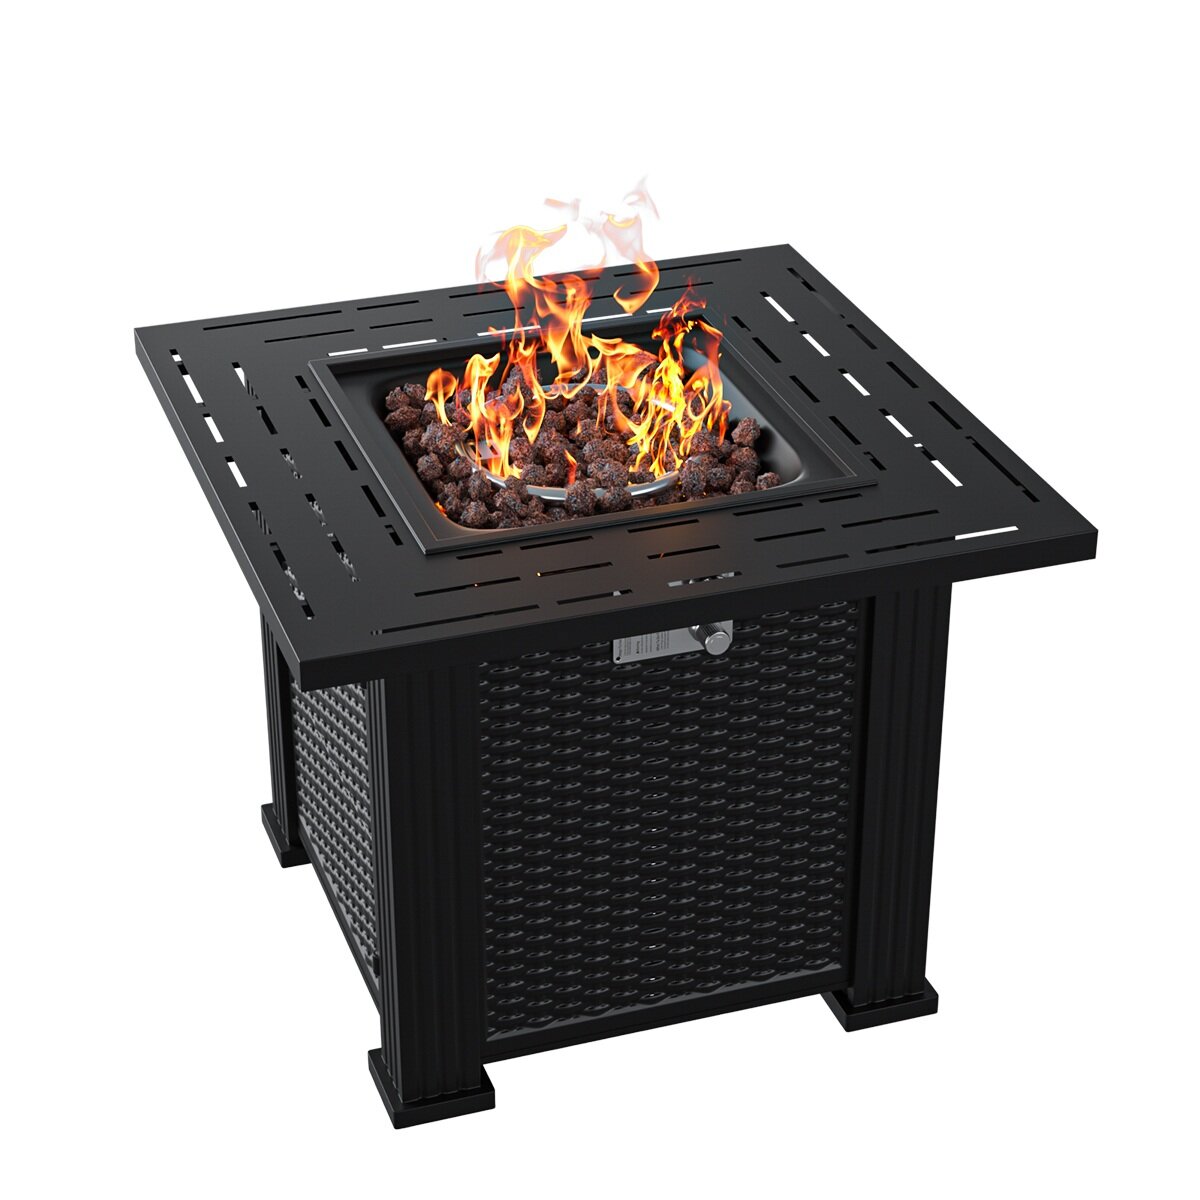 Square Outdoor Fireplace Propane Fire Pit Patio Gas Camping Table Garden Burner